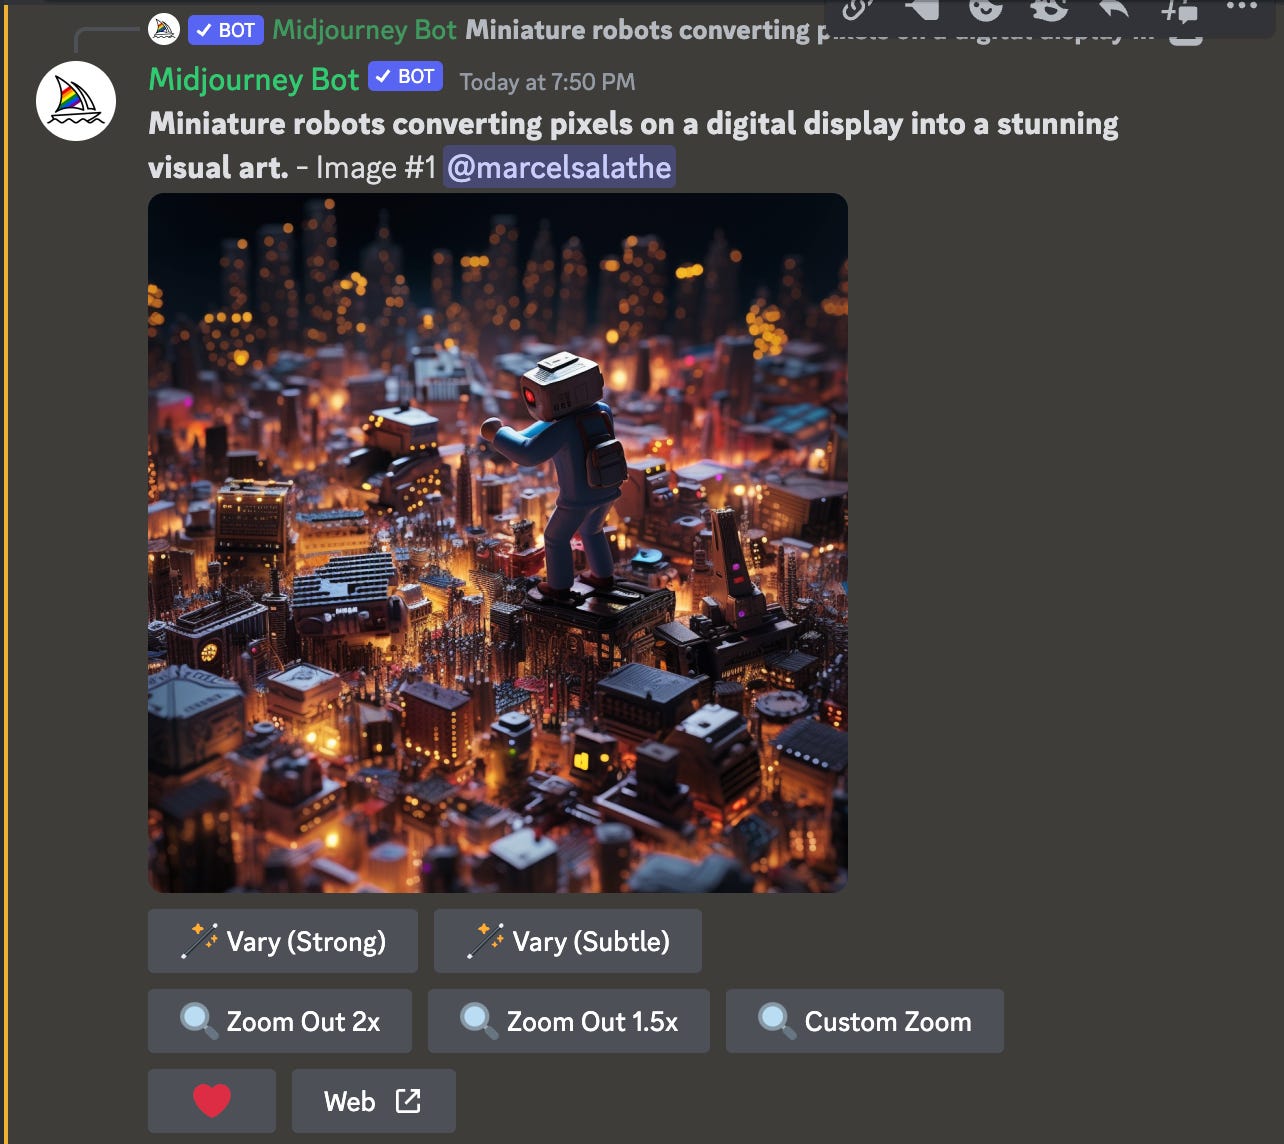 How to Create a Discord Bot to Download Midjourney Images